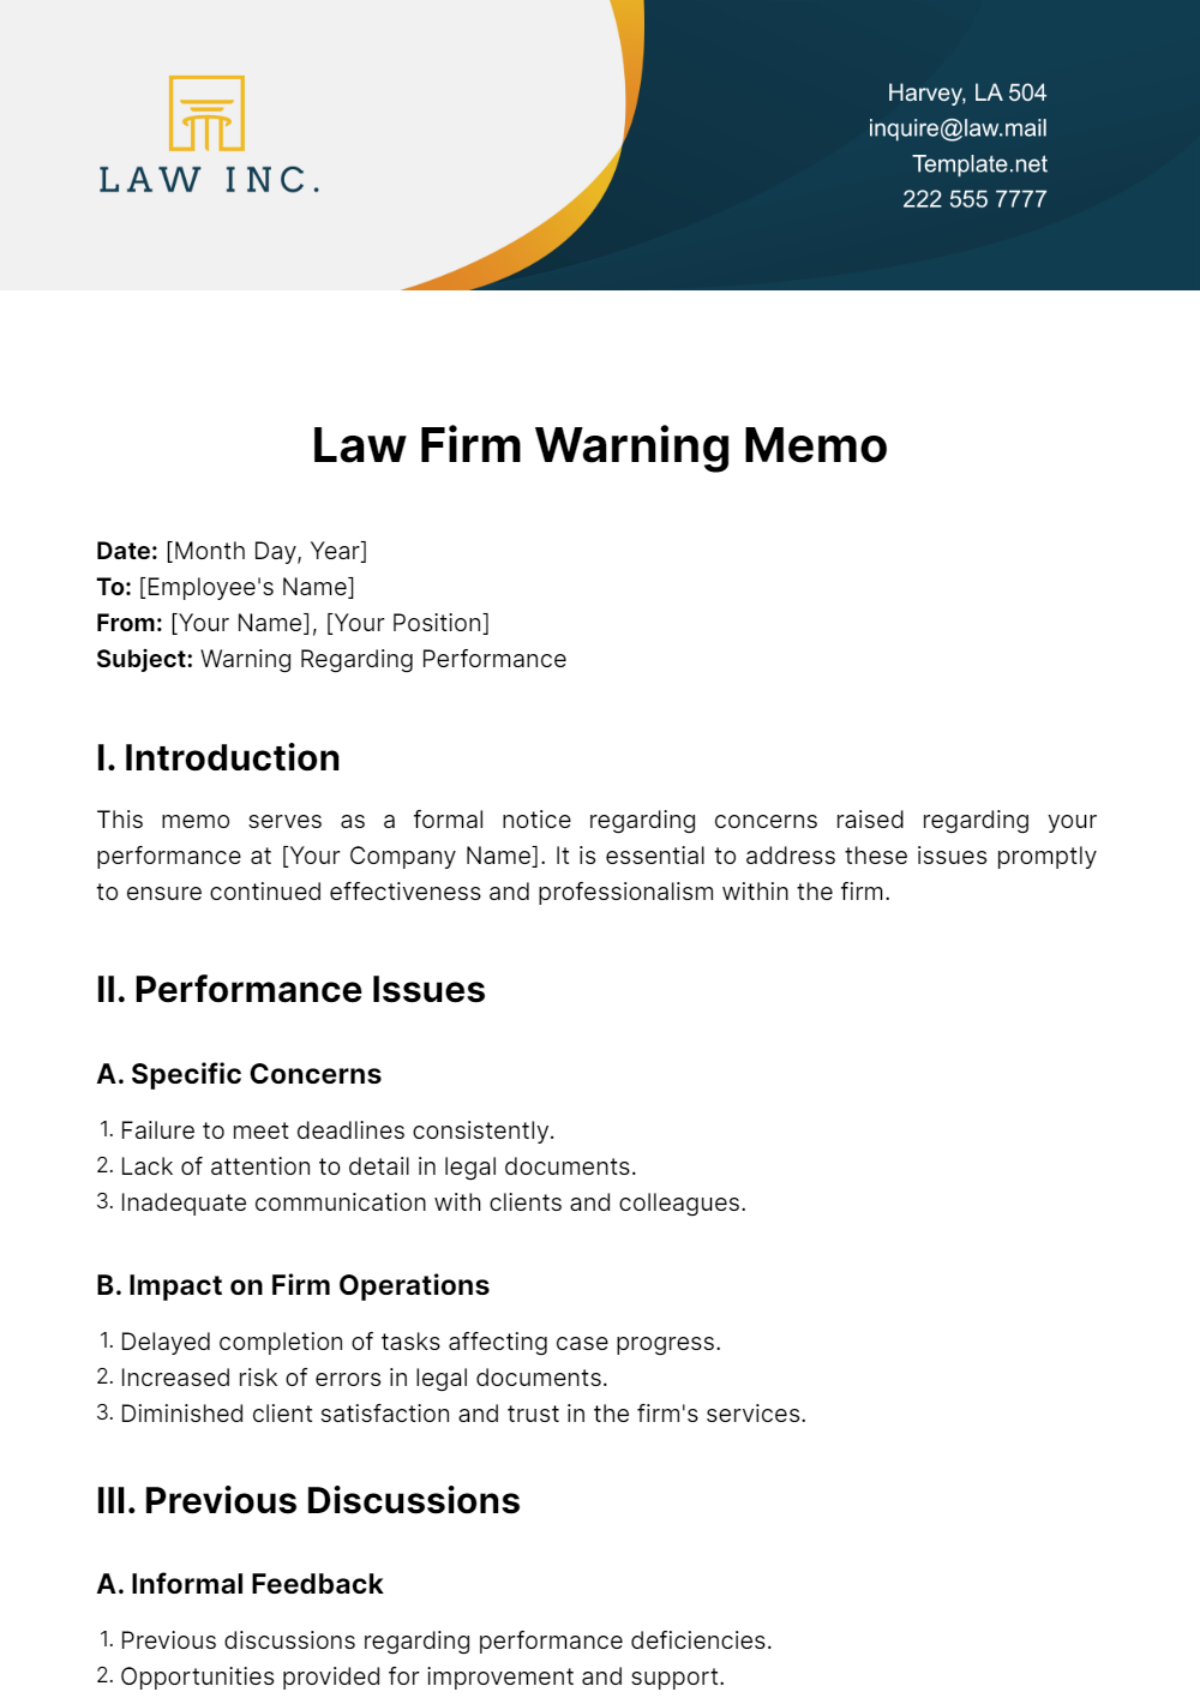 Free Law Firm Warning Memo Template